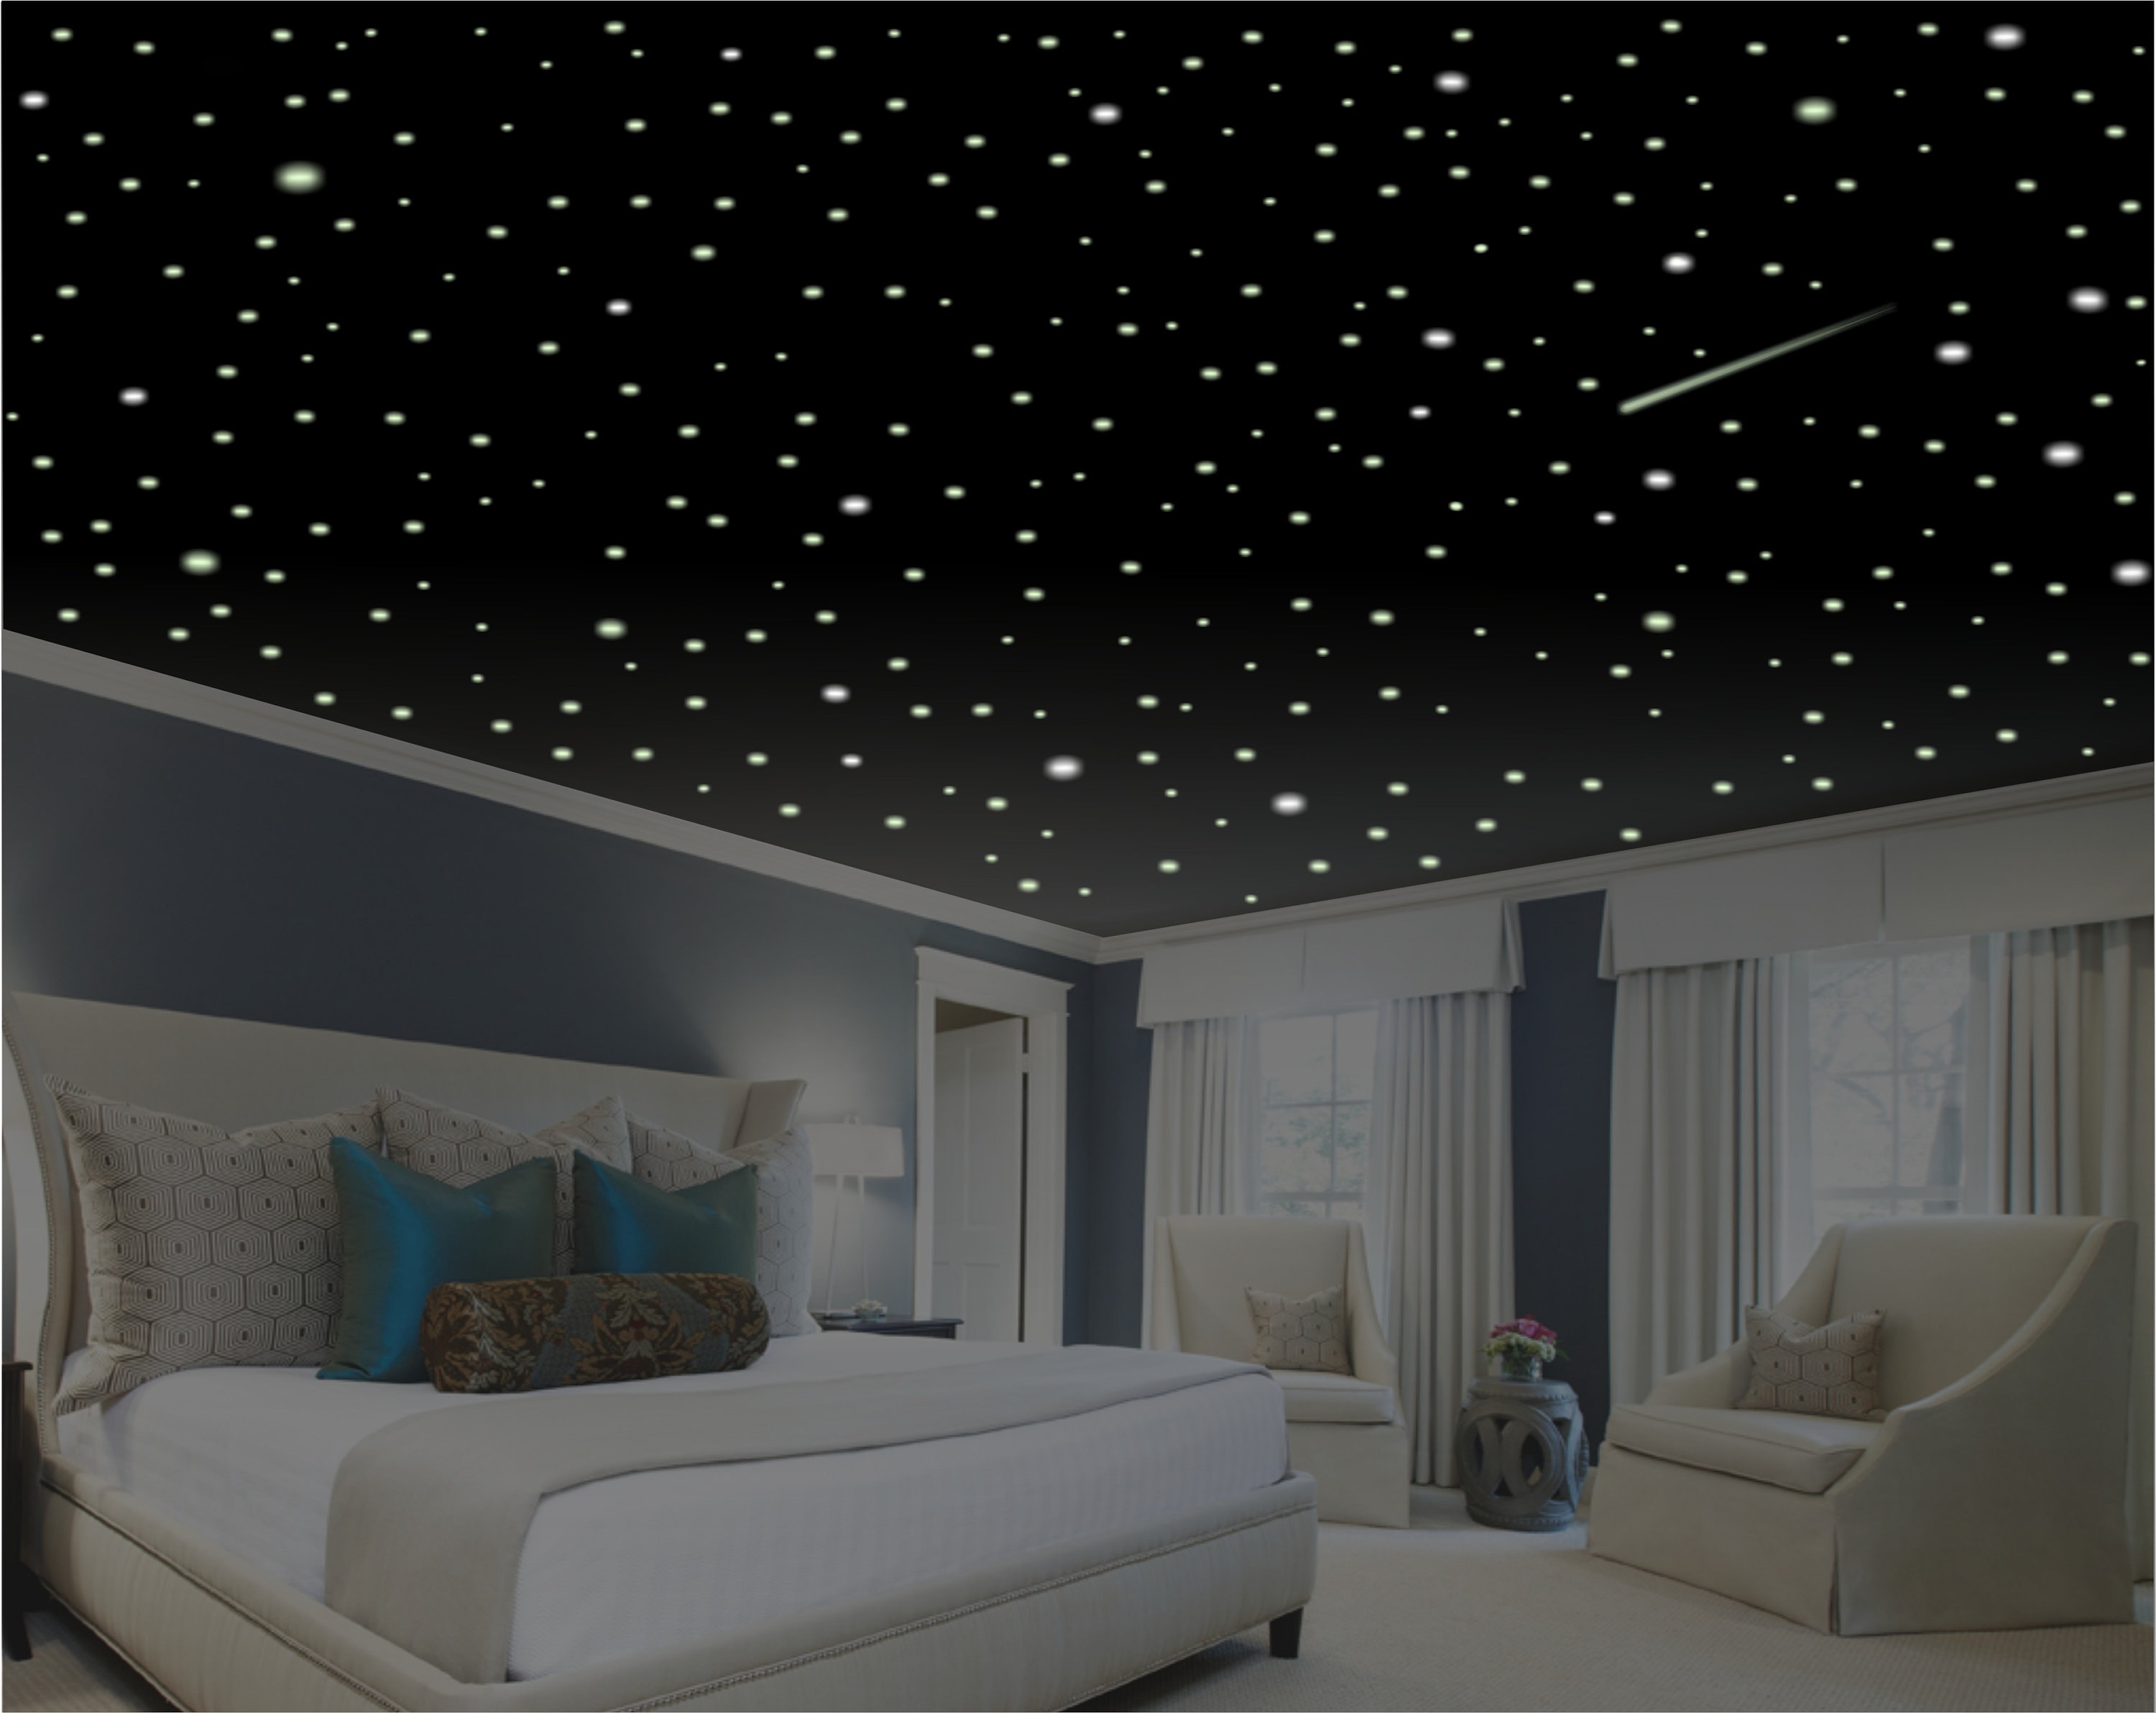 Glow in the dark stars plastic shapes for bedroom ceiling wall child's nursery 